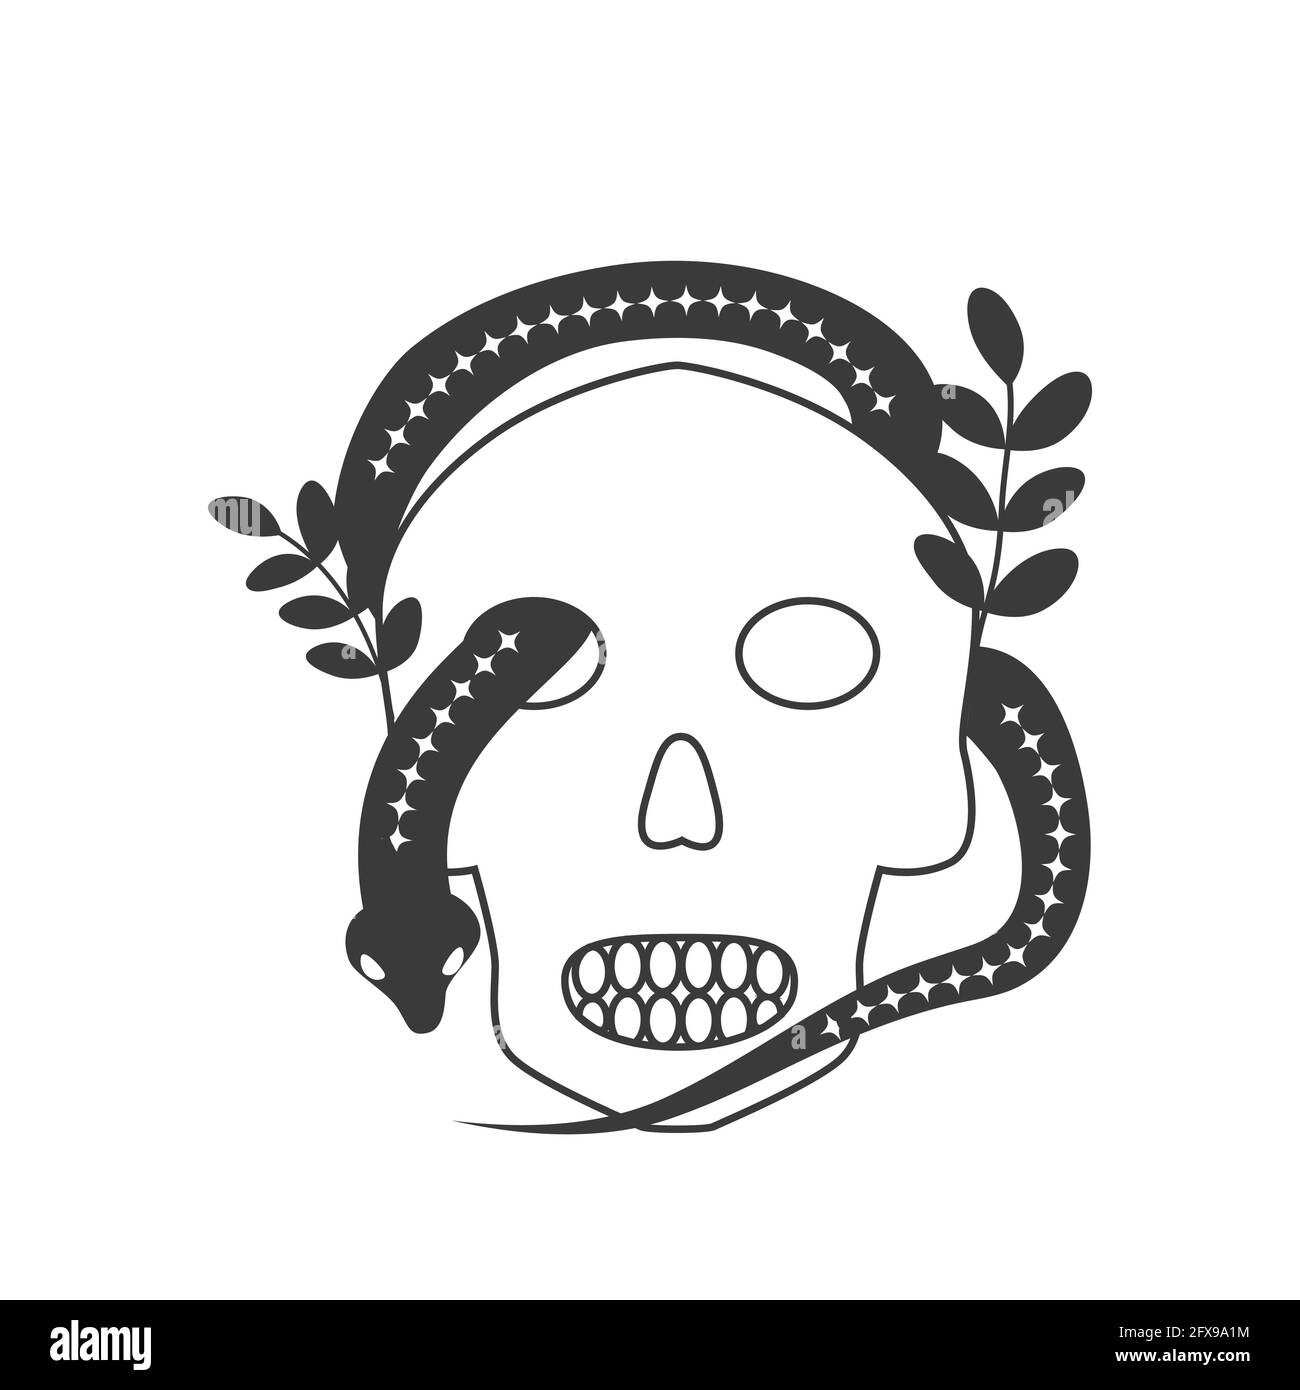 Esoteric symbol skull, alchemy and witchcraft art. Mystical and magical design Stock Vector